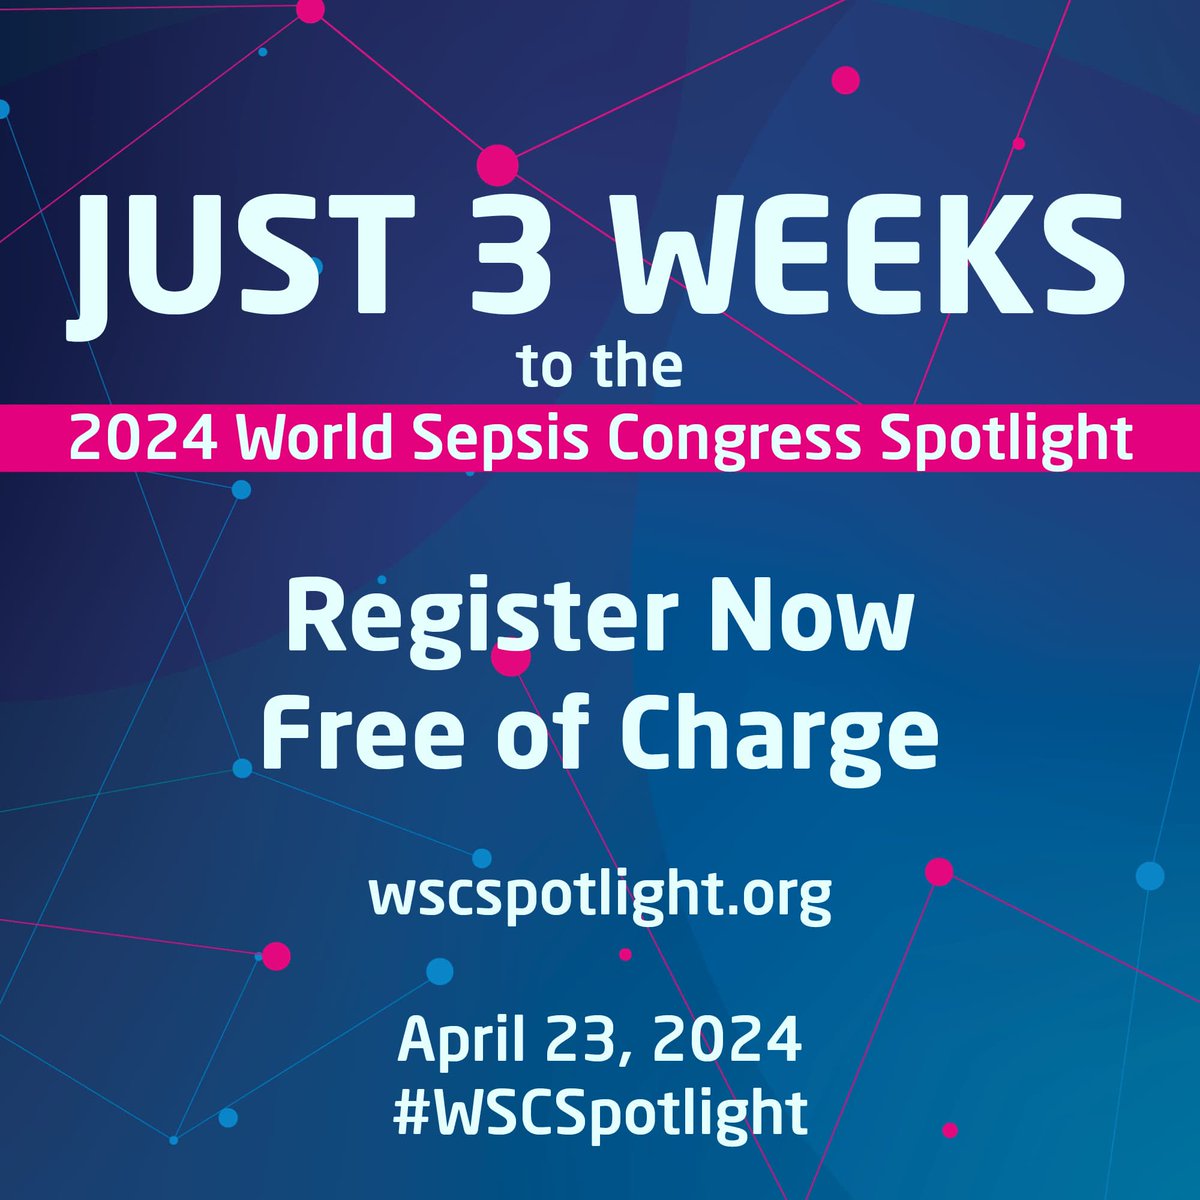 The 2024 #WSCSpotlight on April 23 features 55 #sepsis experts from 25+ countries. Topics include early diagnosis, data, AI, and predictive modeling, pediatric sepsis, biomarkers, and more. Registrations now open wscspotlight.org